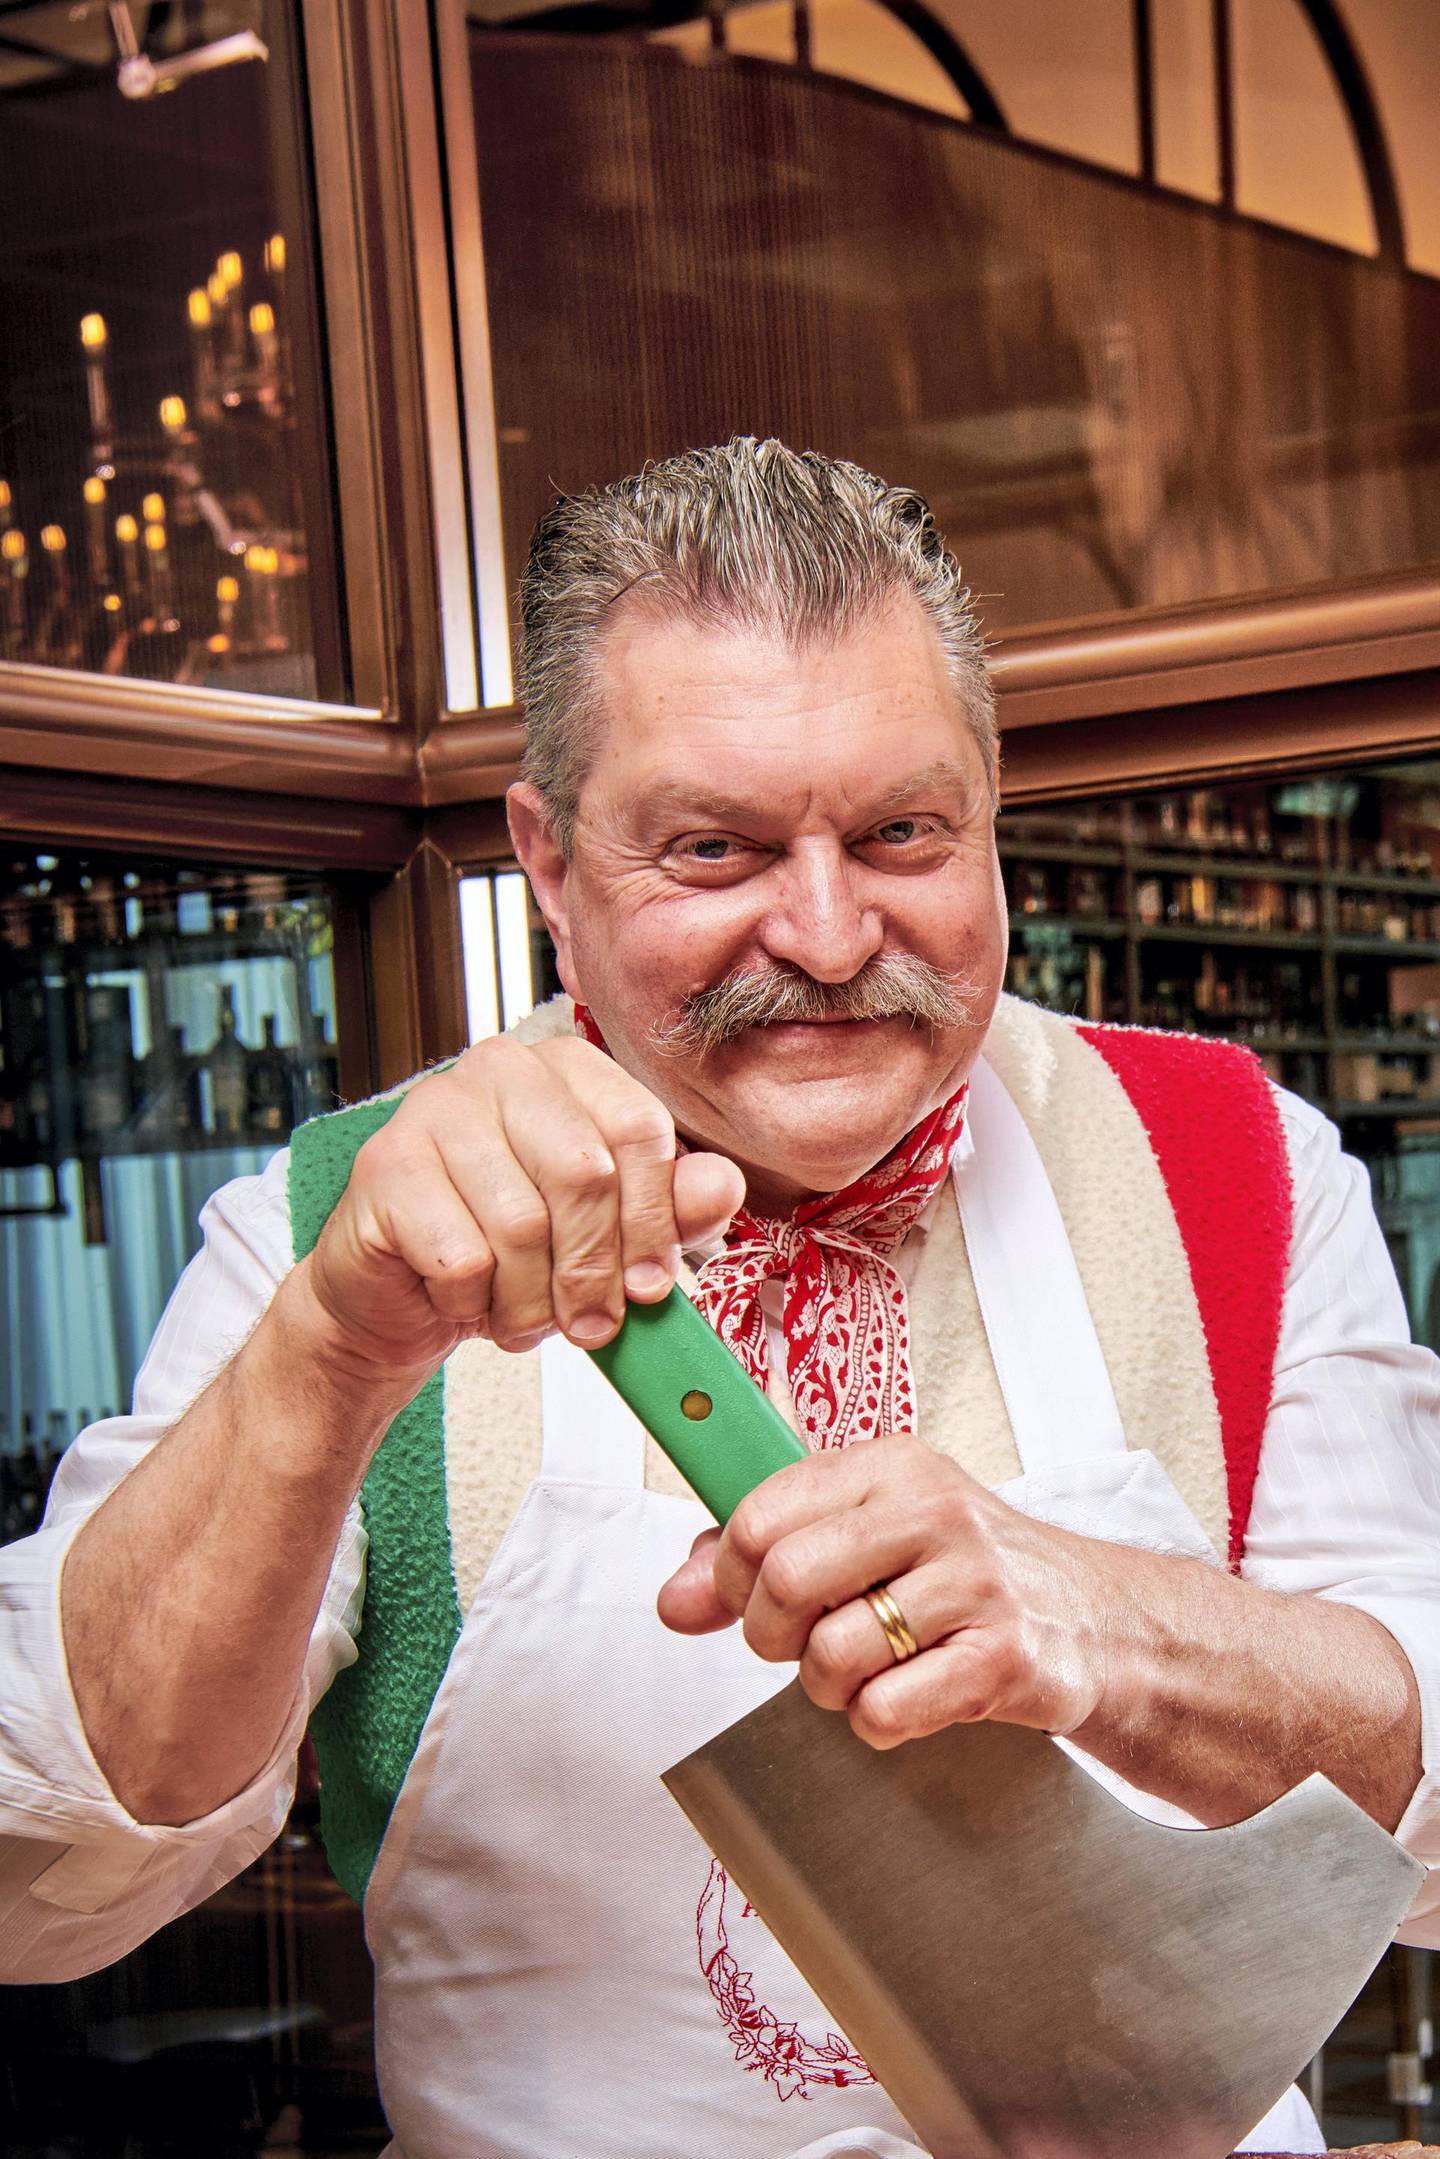 Dario Cecchini's favourite part of the animal is the beef knees or beef knuckles - because they are seldom bought by others. Courtesy Carna by Dario Cecchini